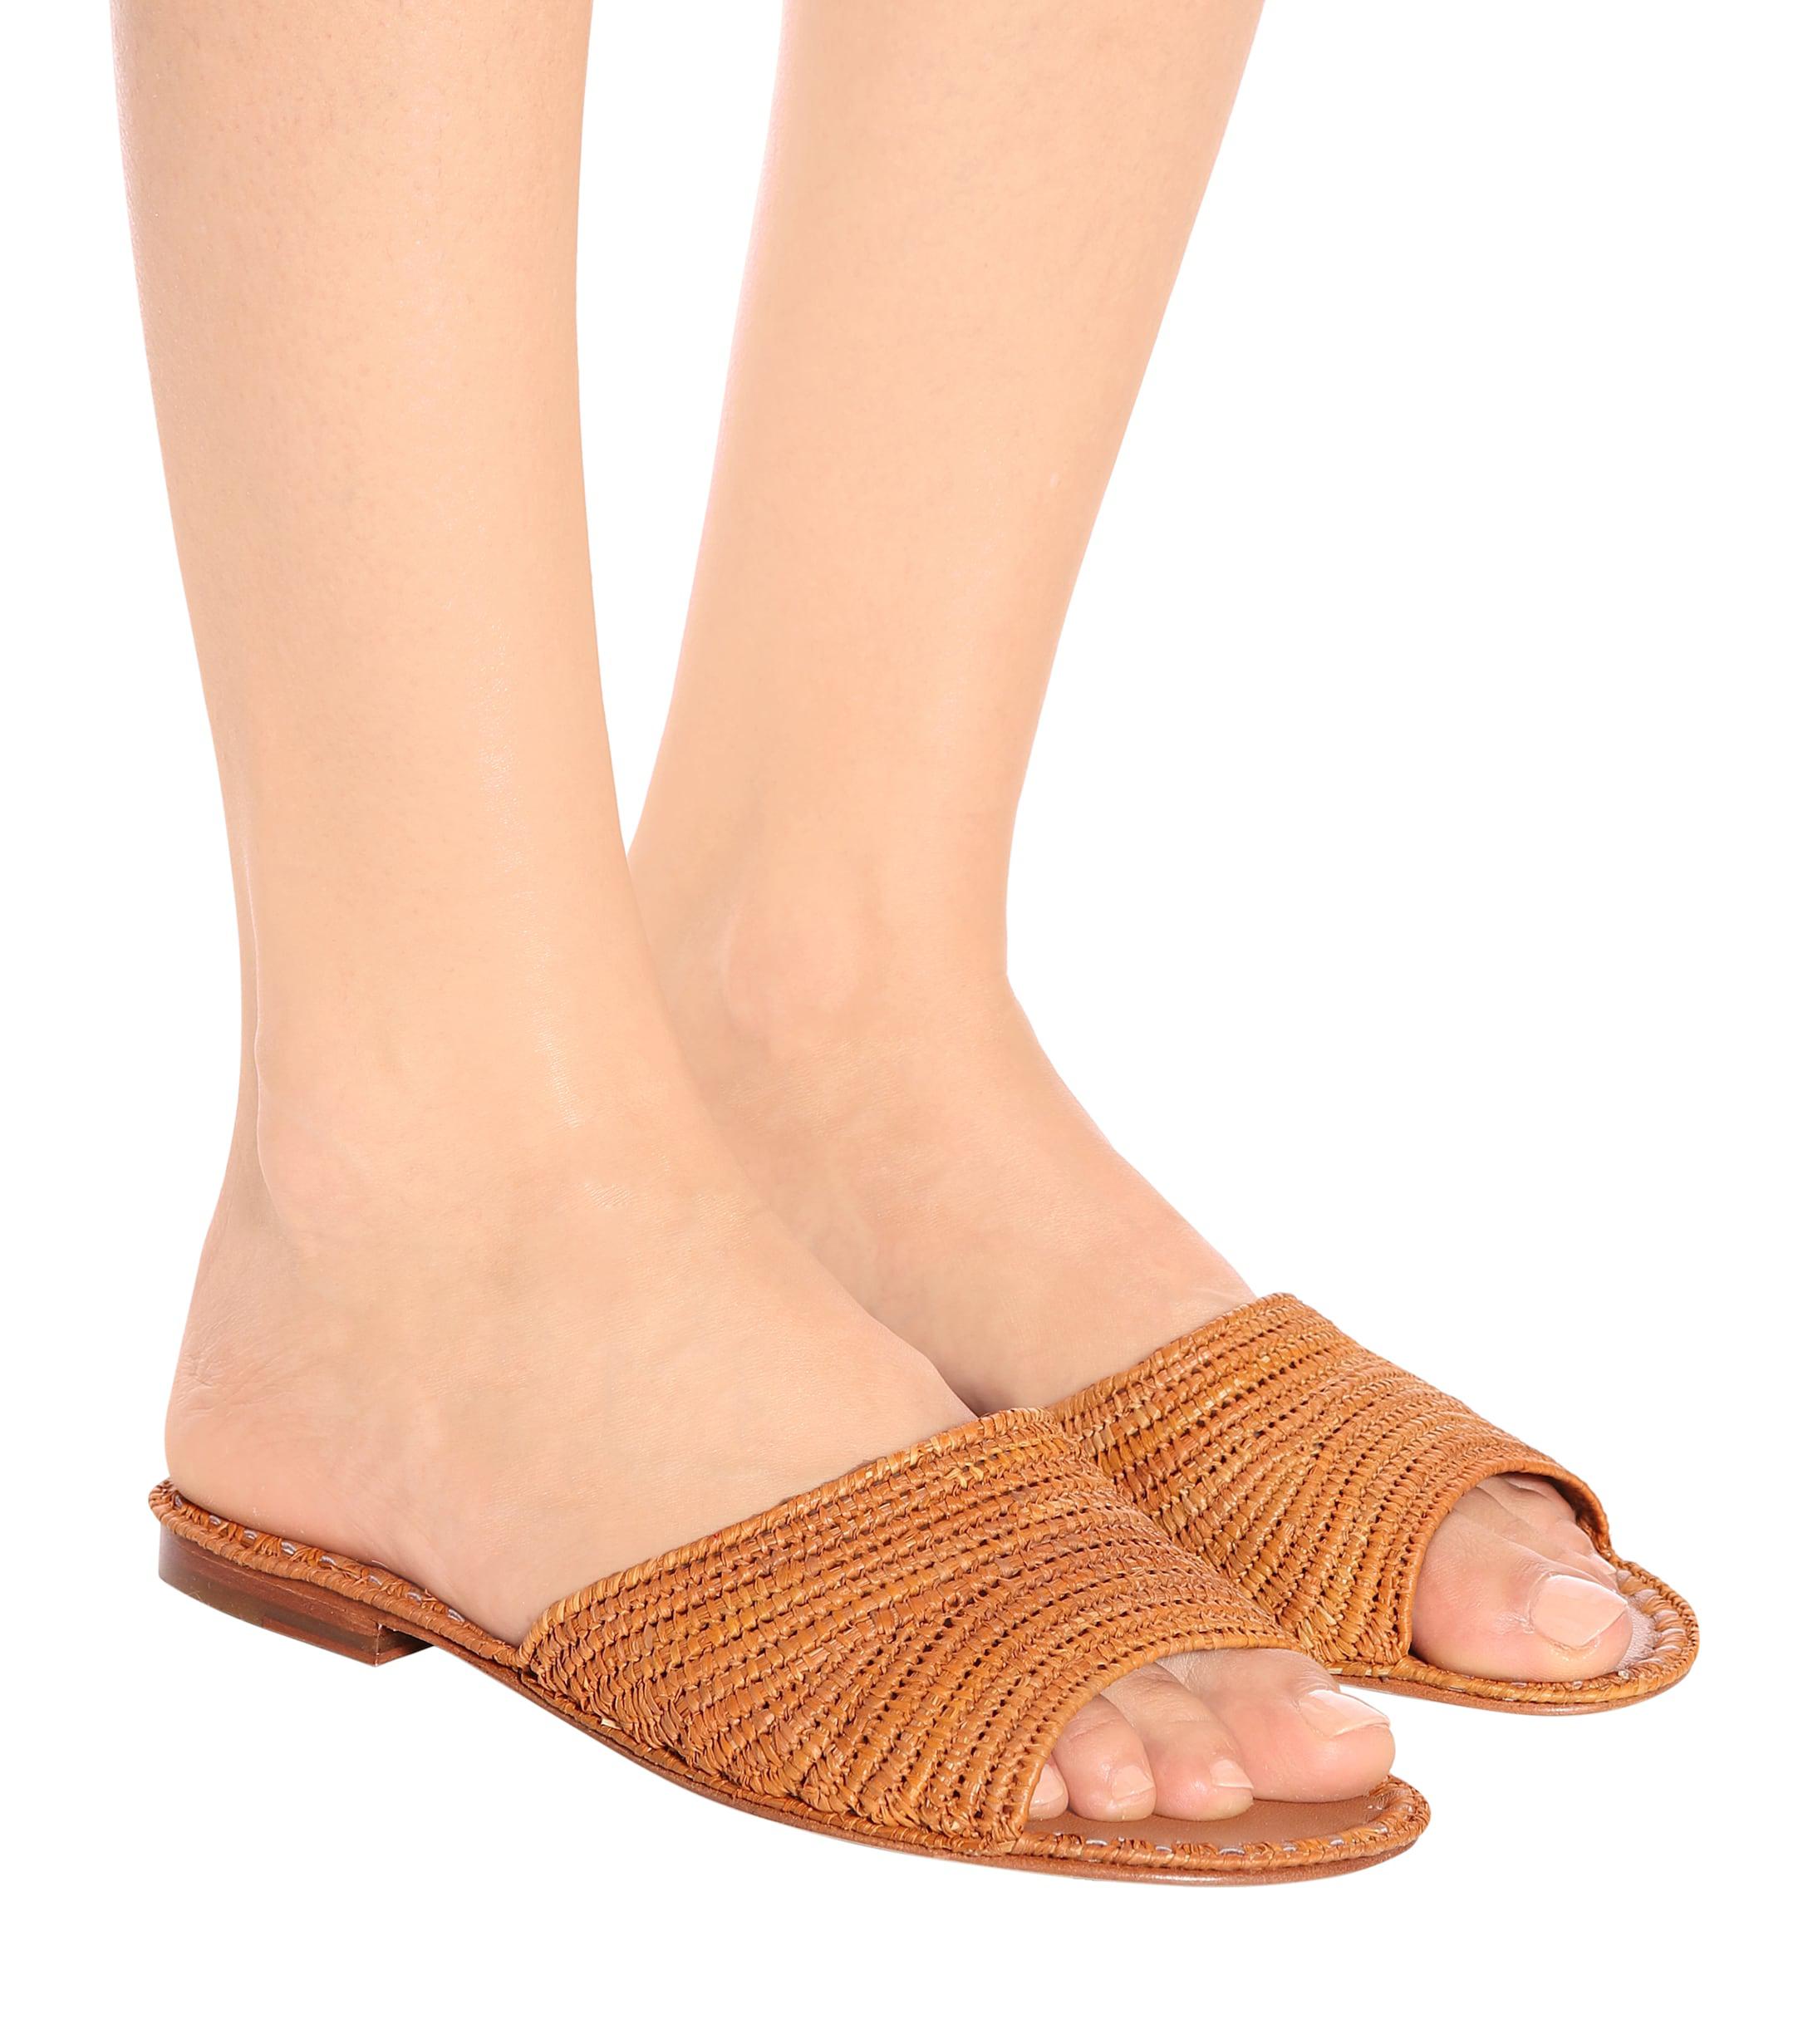 Carrie Forbes Raffia Sandals in Beige (Natural) - Lyst